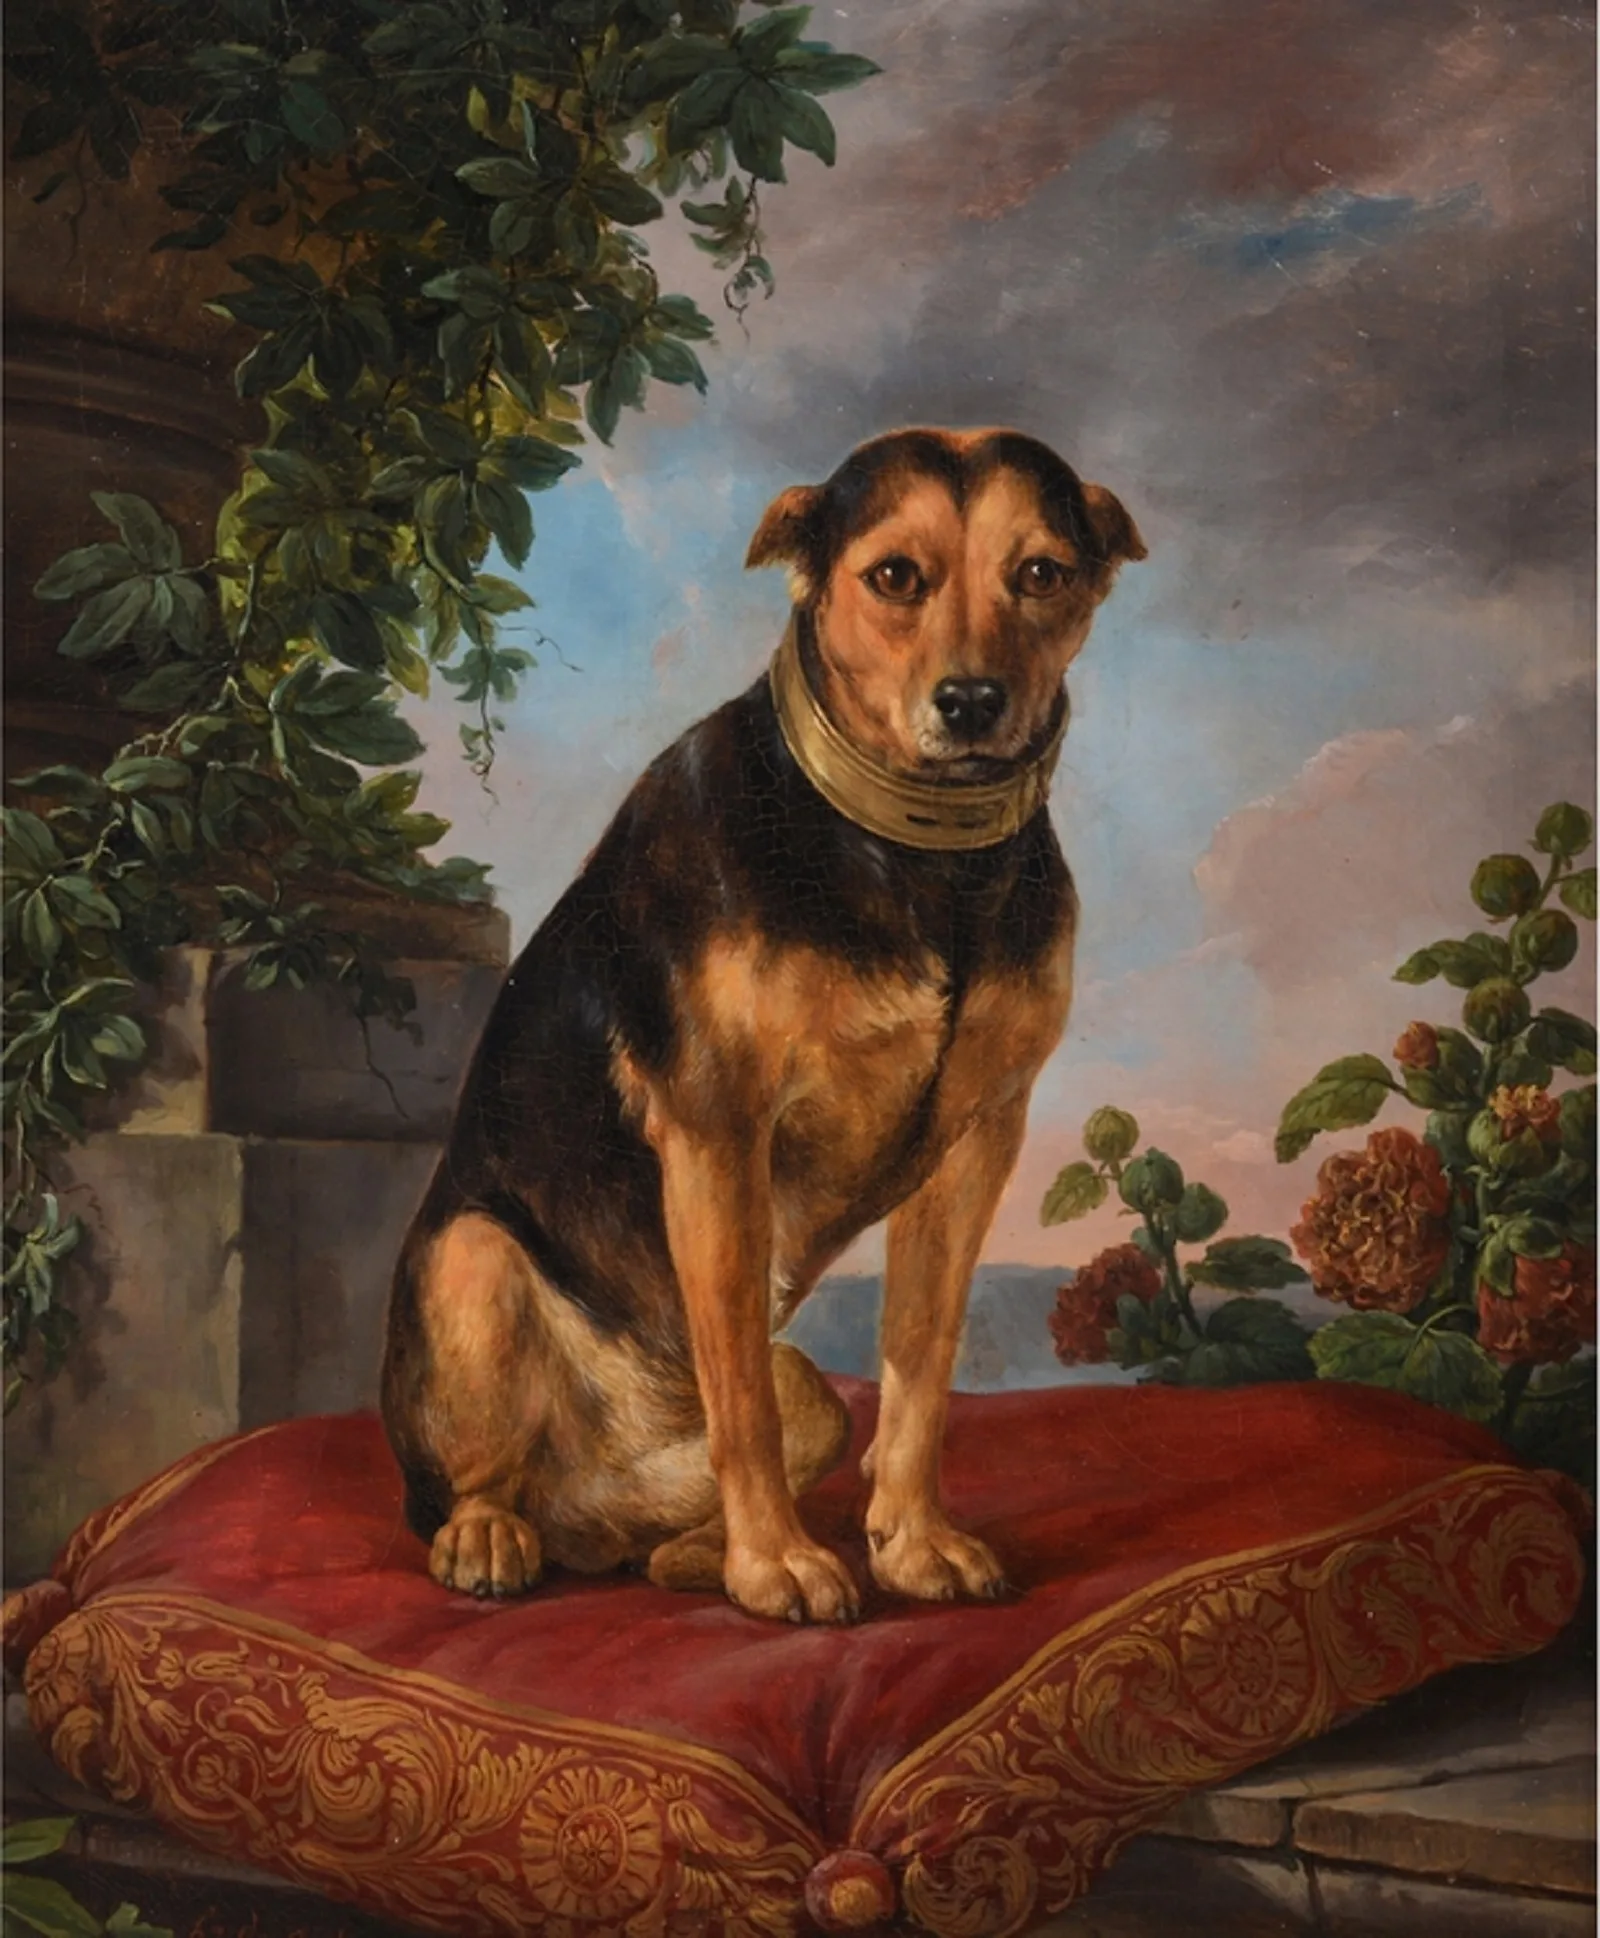 painting of dog sitting on red cushion